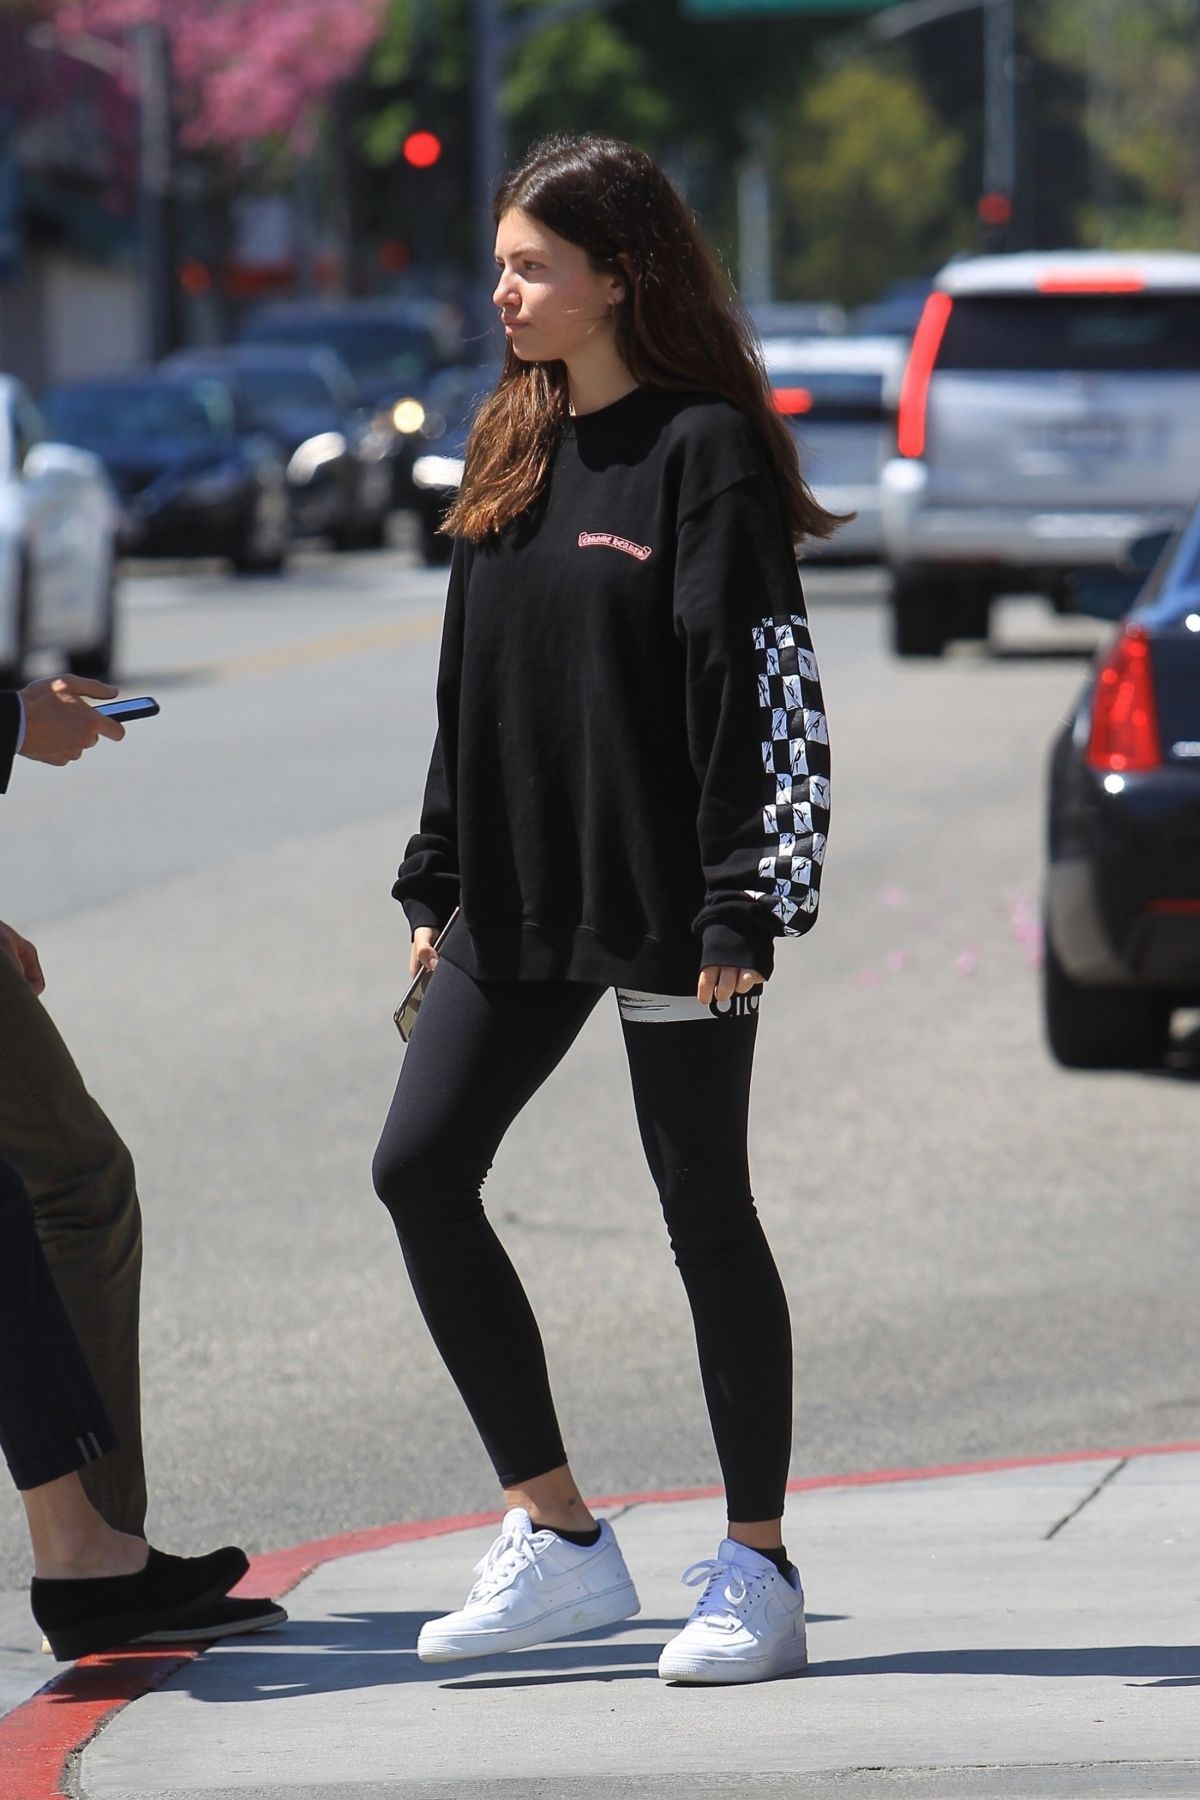 thylane-blondeau-out-for-lunch-in-beverly-hills-04-23-2019-7.jpg